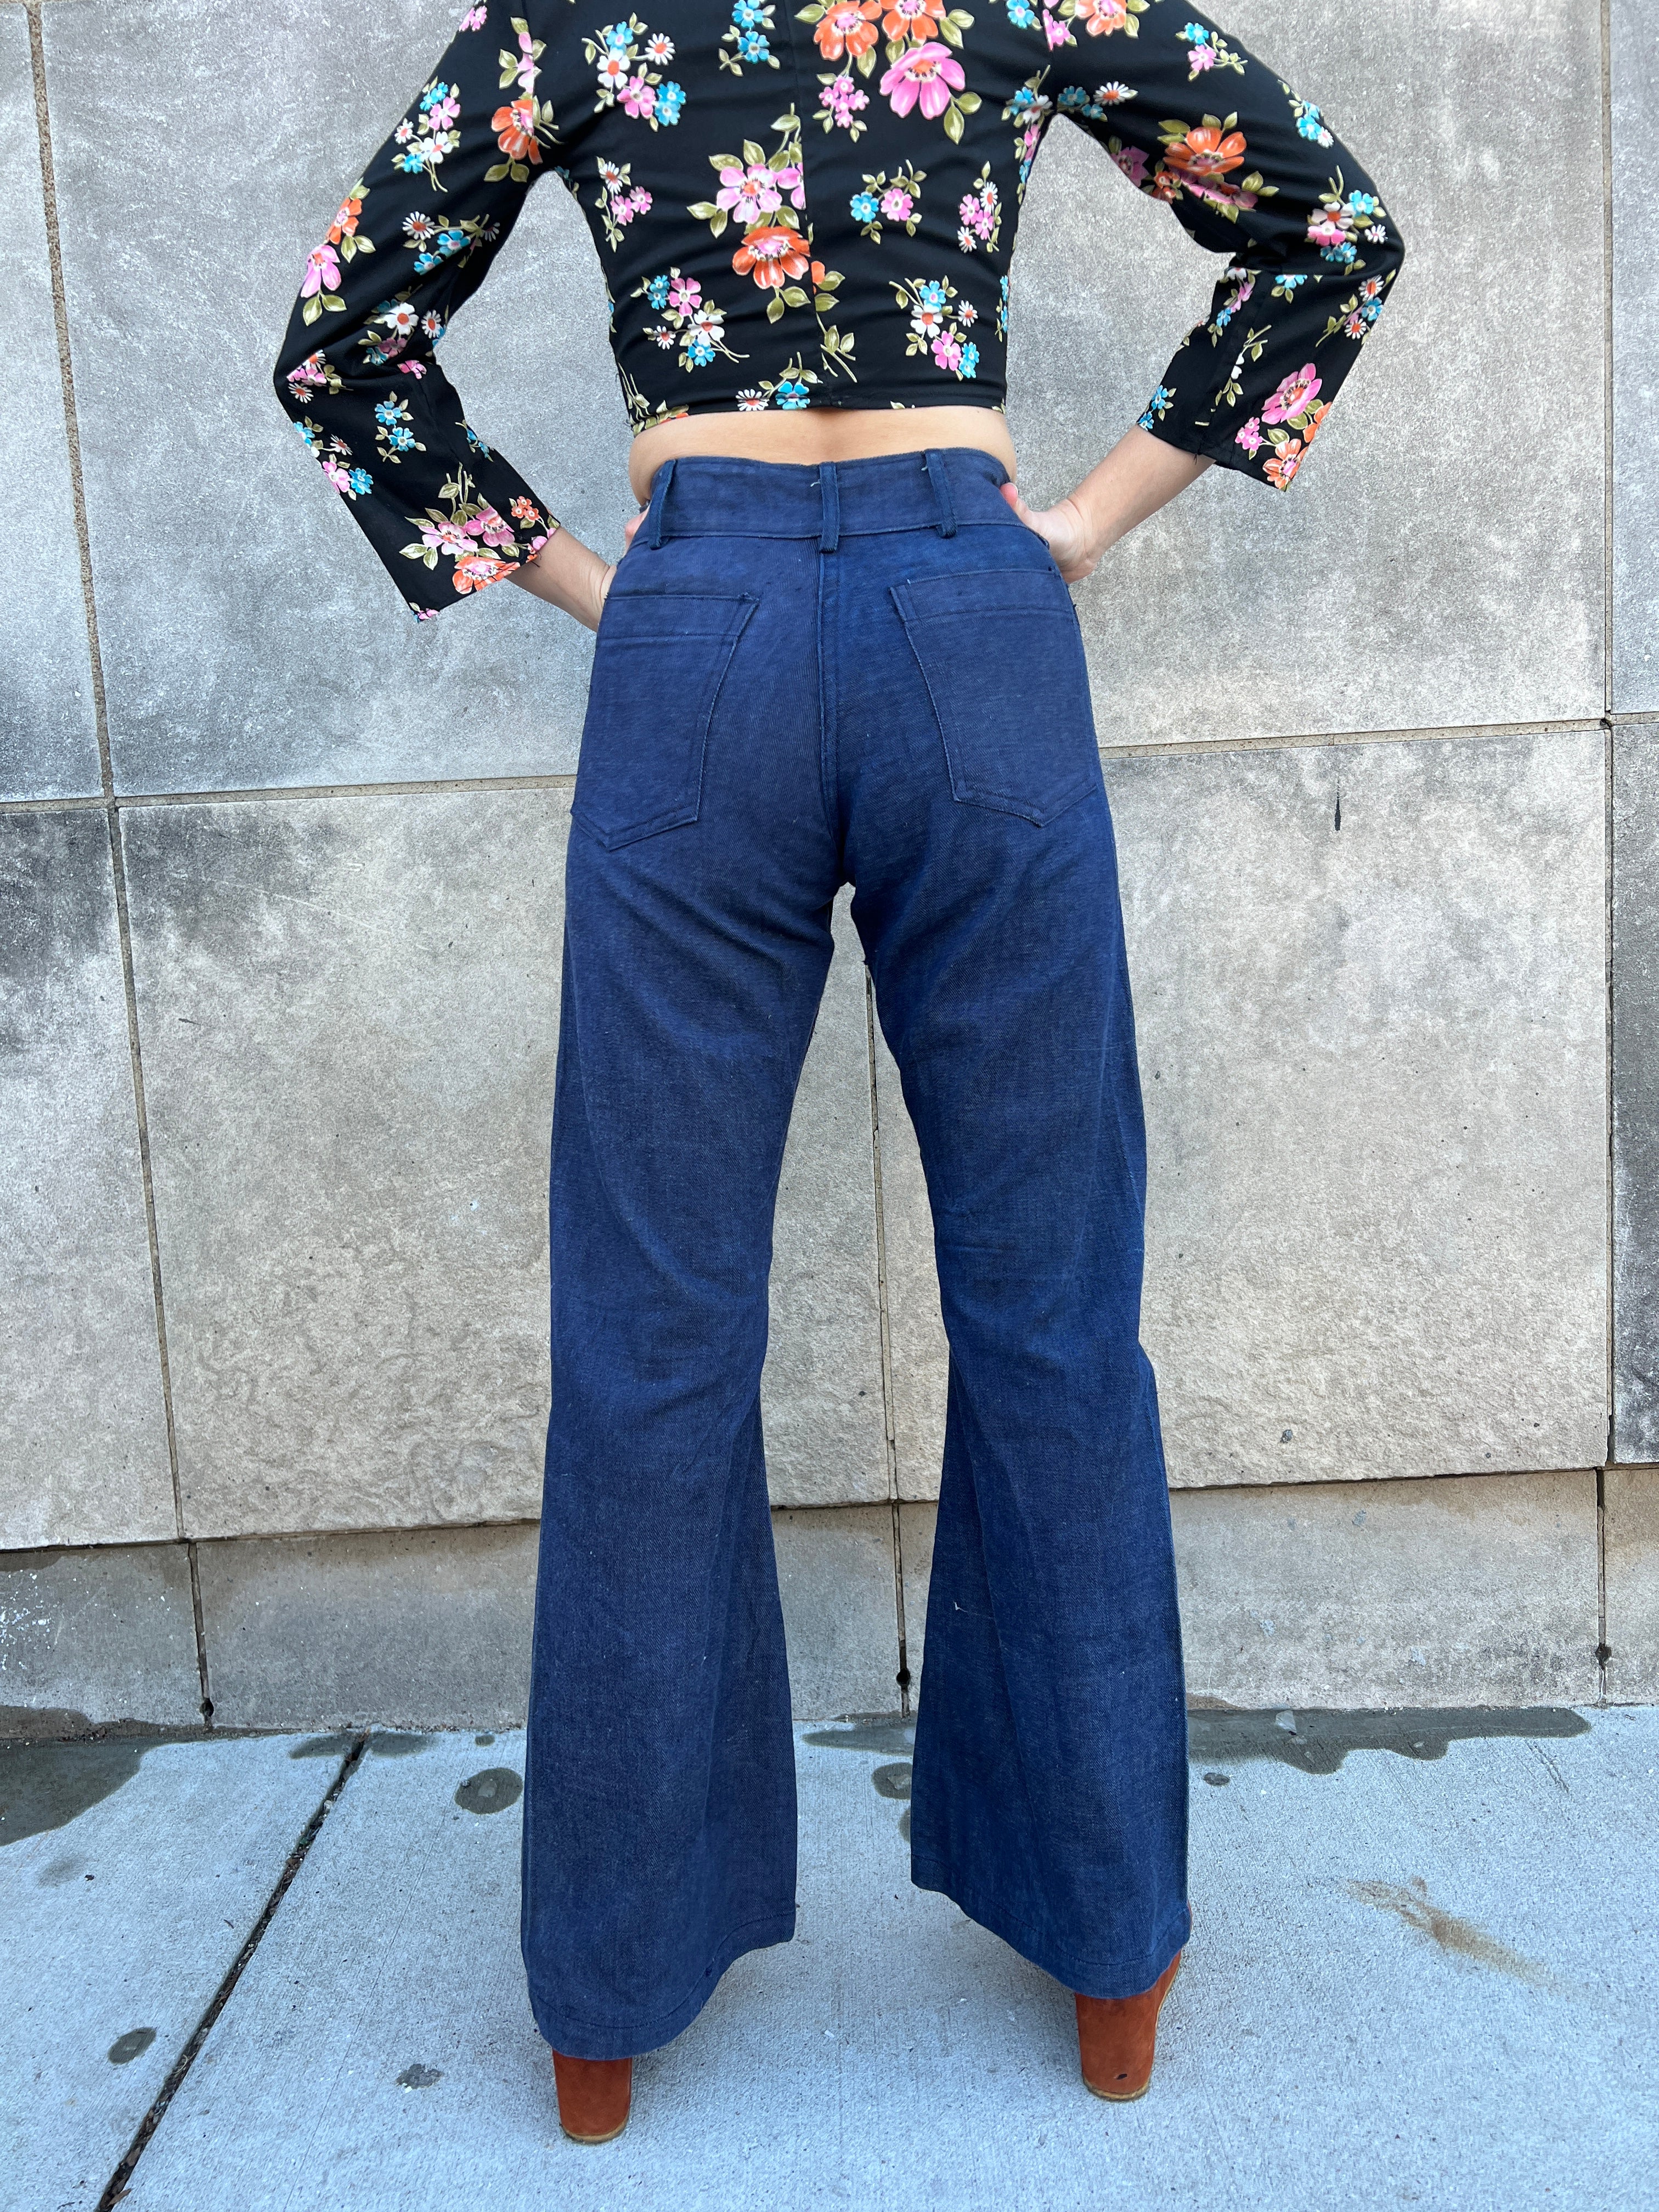 Womens High Waisted Classic Bell Bottom Jeans Denim Pants High Rise Bootcut  Flare Jean Pants with Wide Leg and Belt - Walmart.com